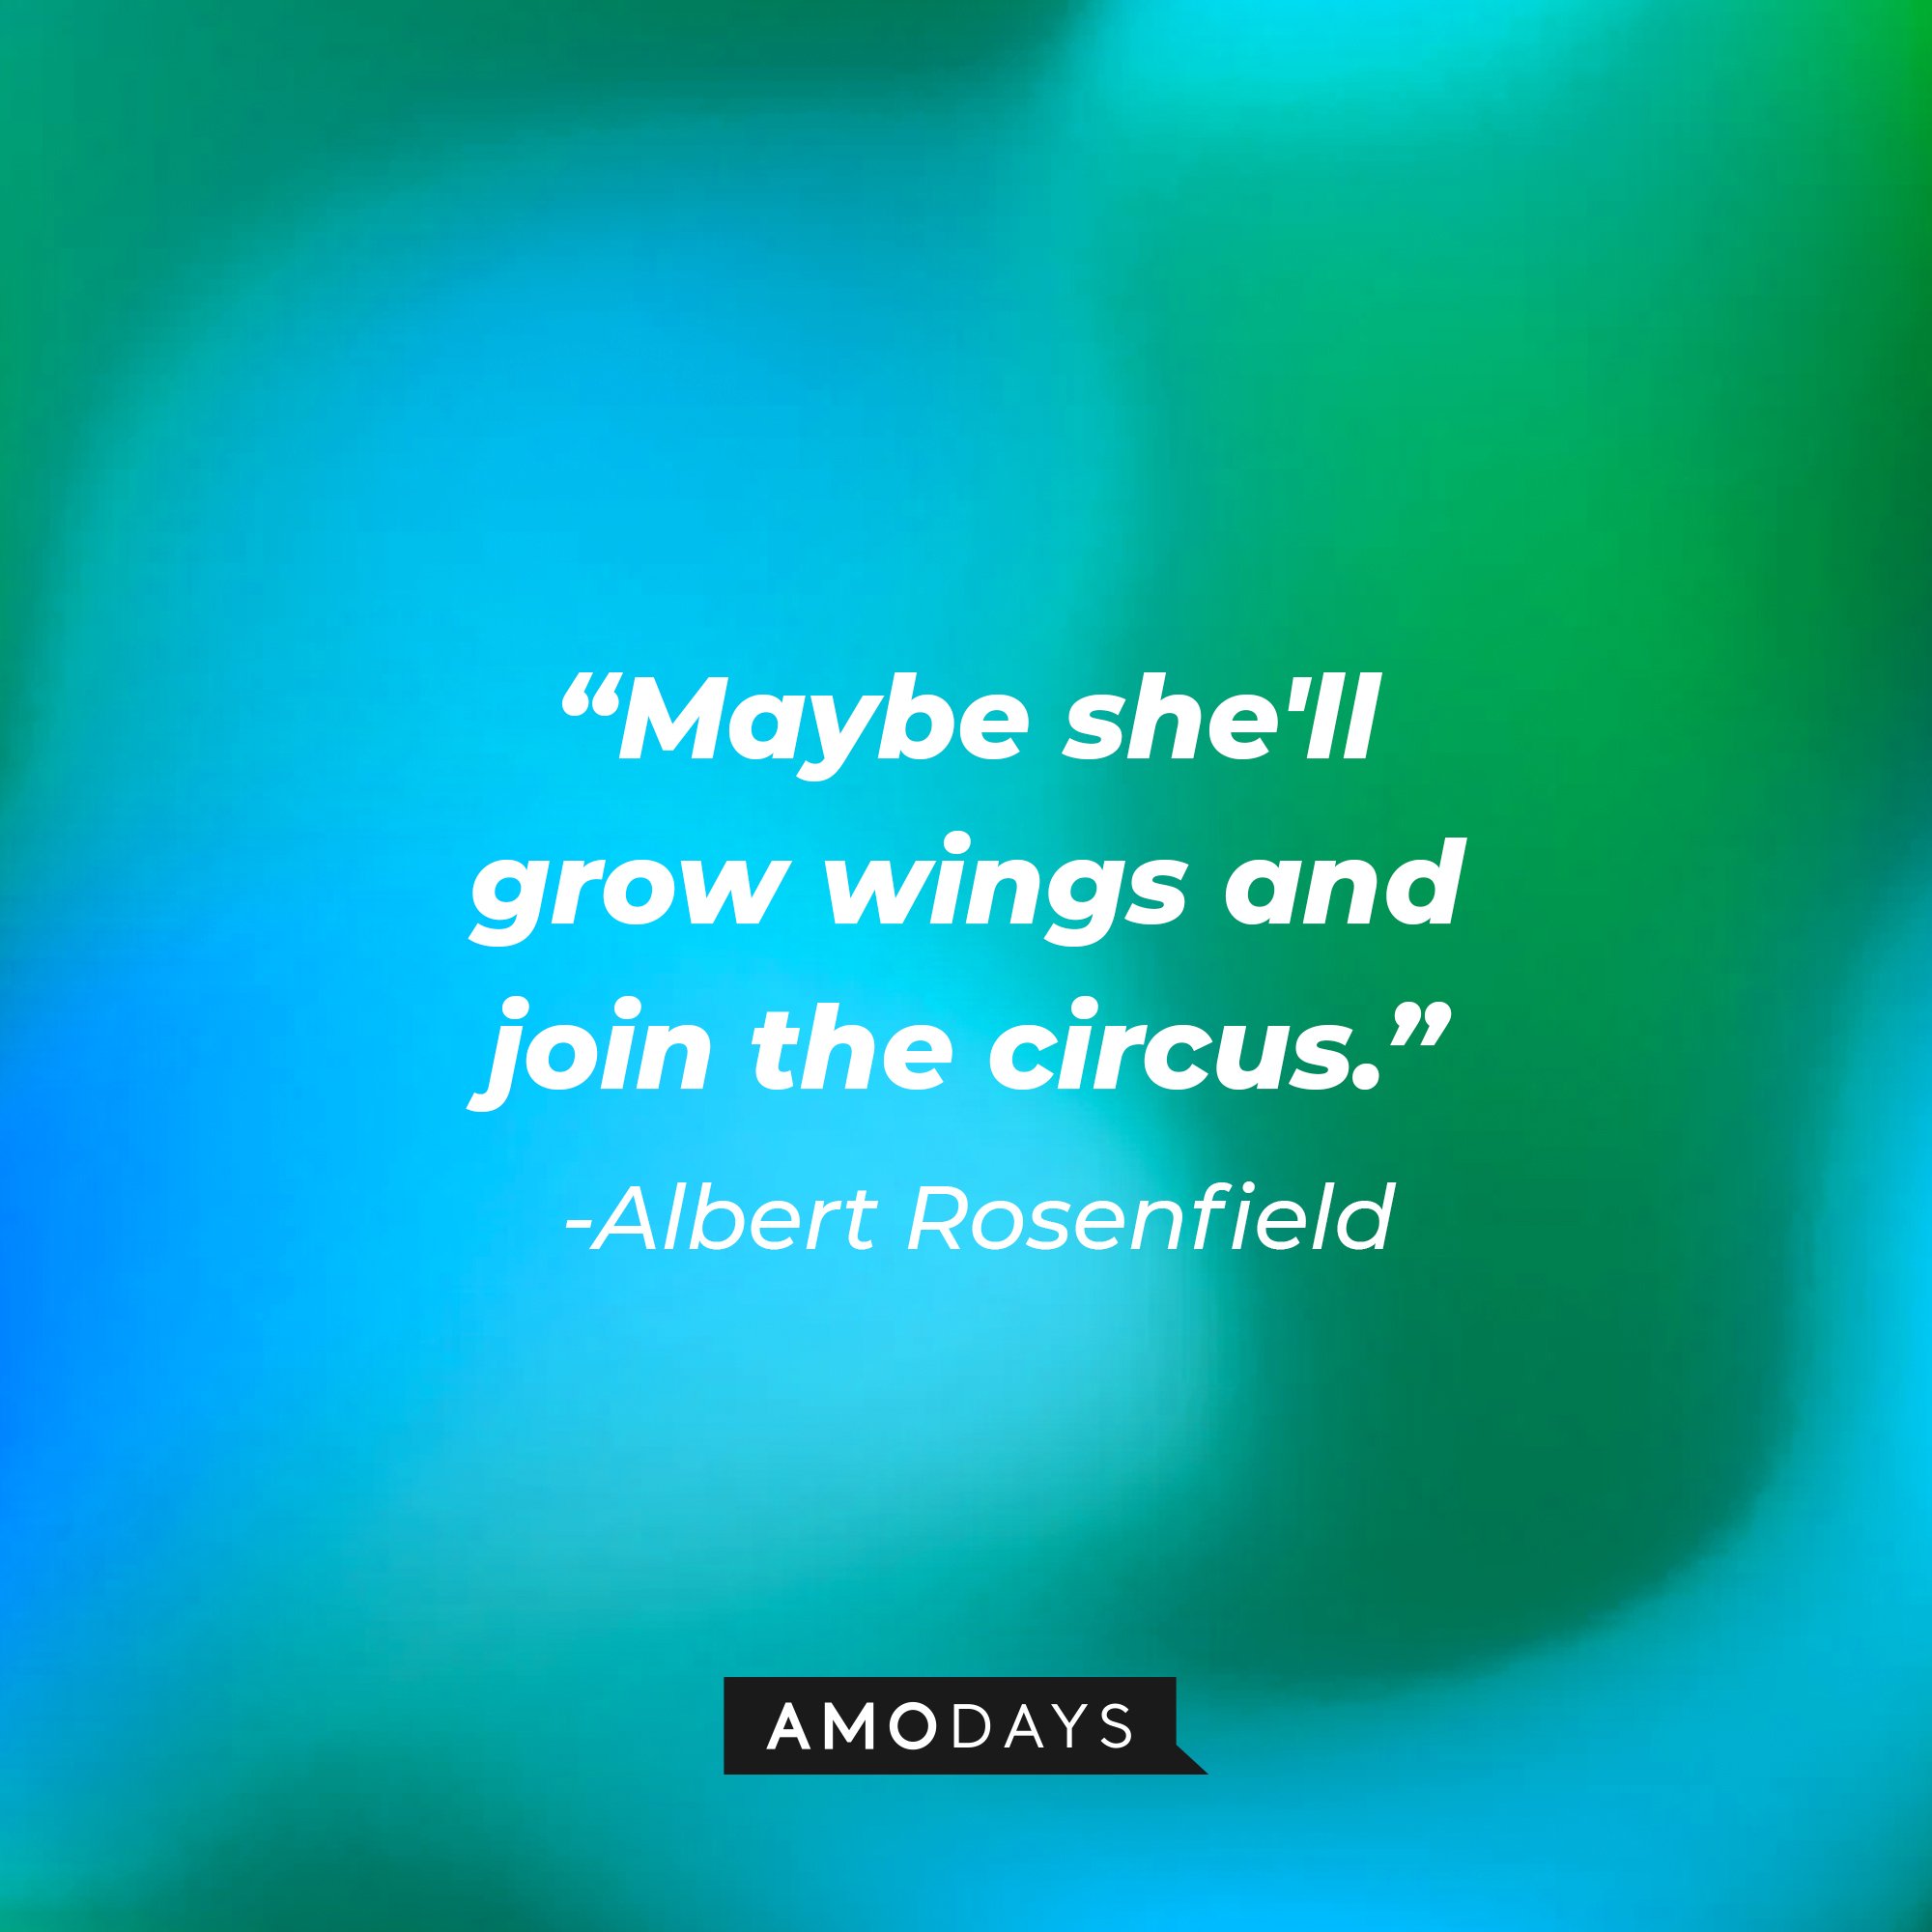  Albert Rosenfield’s quote: "Maybe she'll grow wings and join the circus." | Image: AmoDays